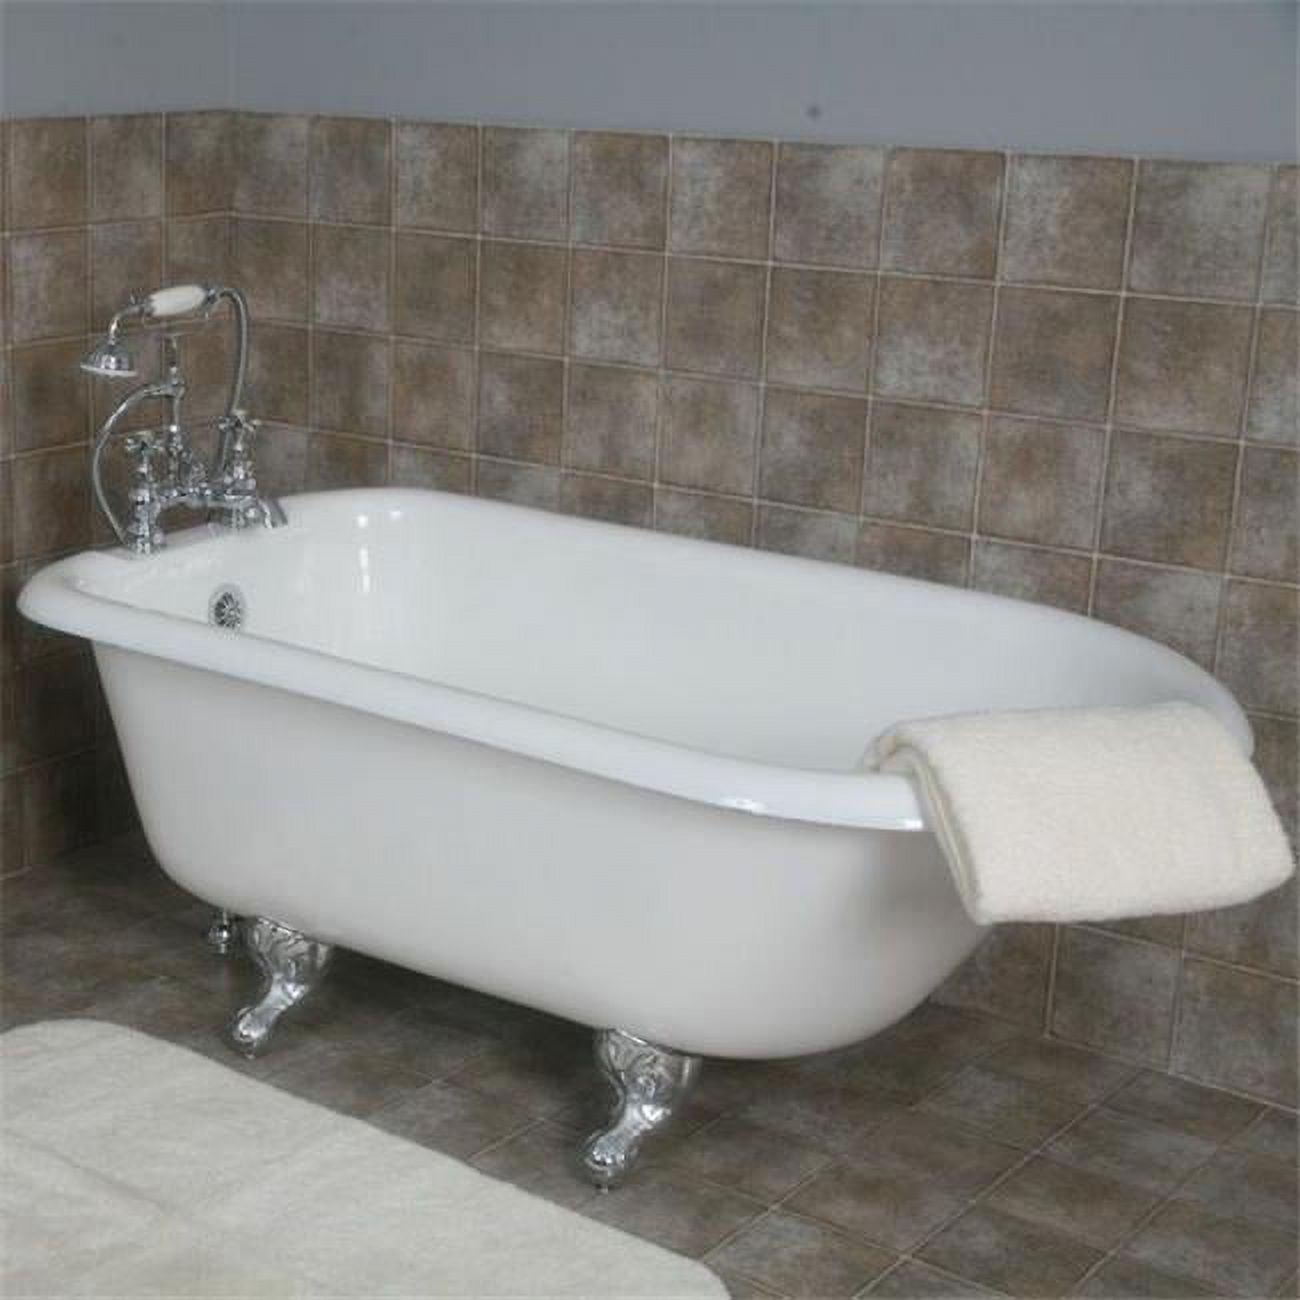 Cambridge Plumbing Cast-Iron Rolled Rim Clawfoot Tub 55" X 30" with 3 3/8" Bathtub Wall Faucet Drillings and Polished Chrome Feet - image 1 of 2